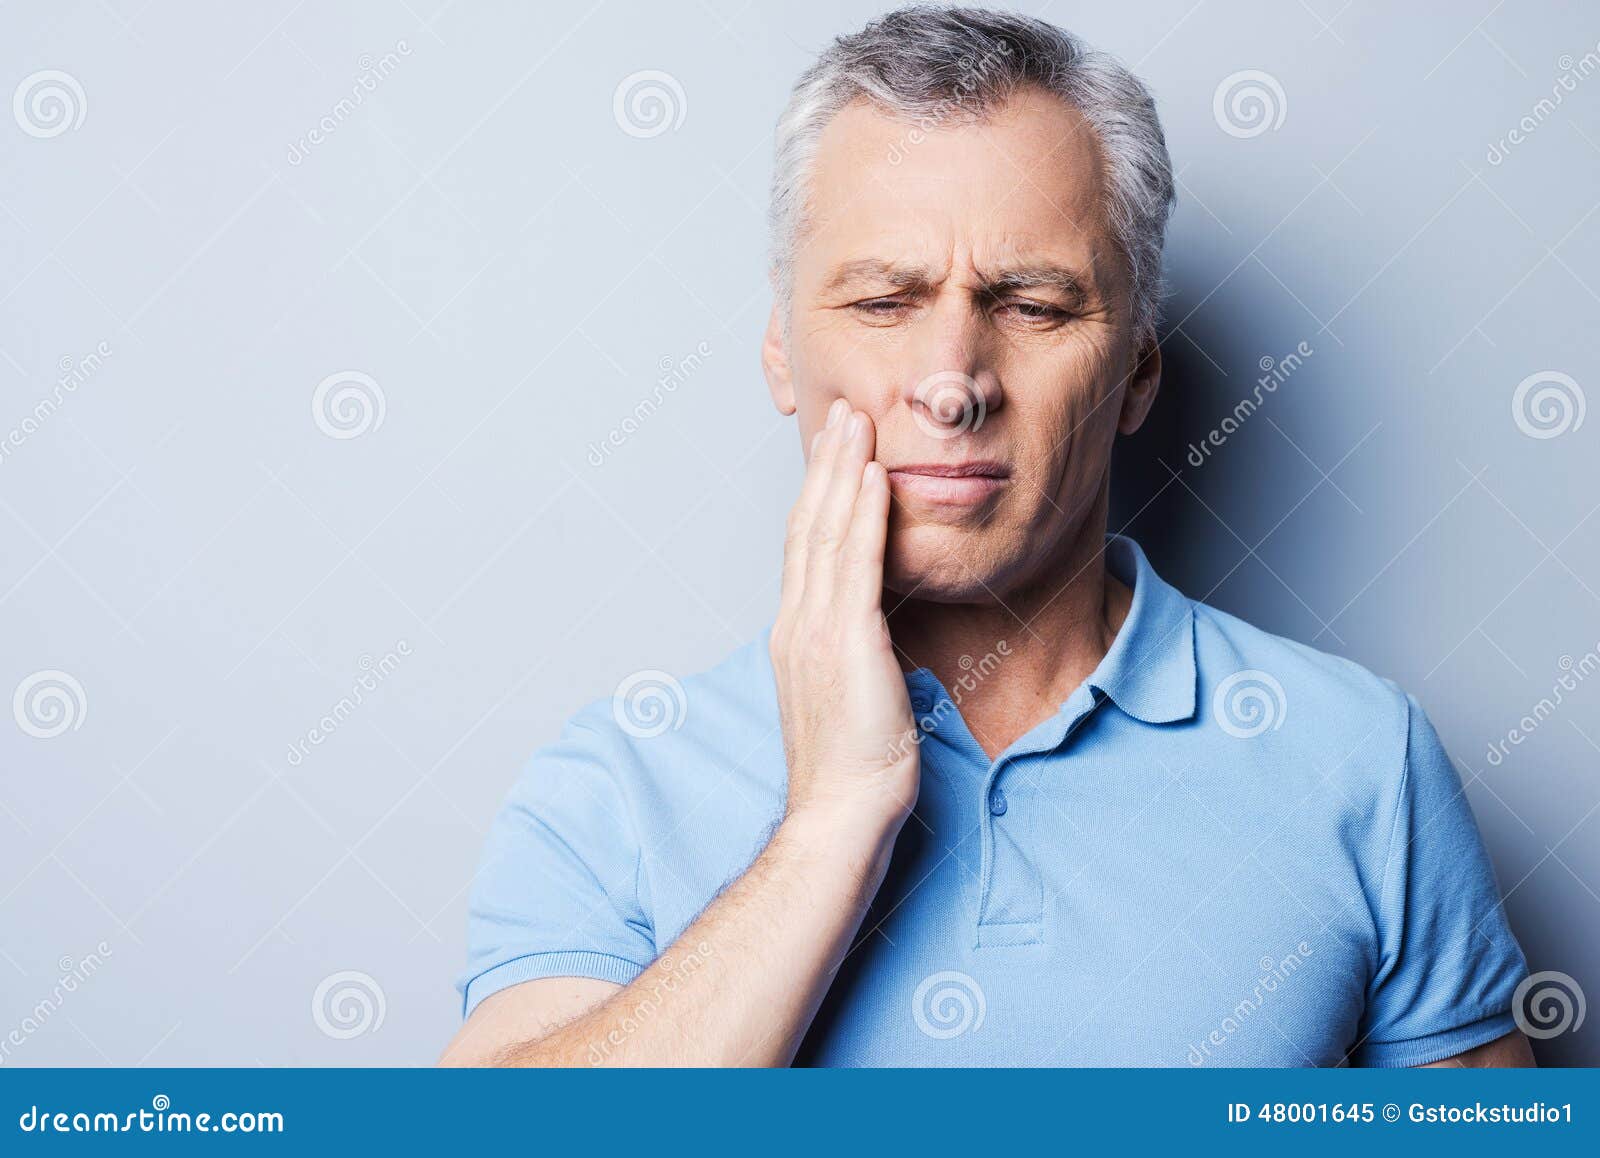 Torturing pain. stock image. Image of emotional, adult - 48001645